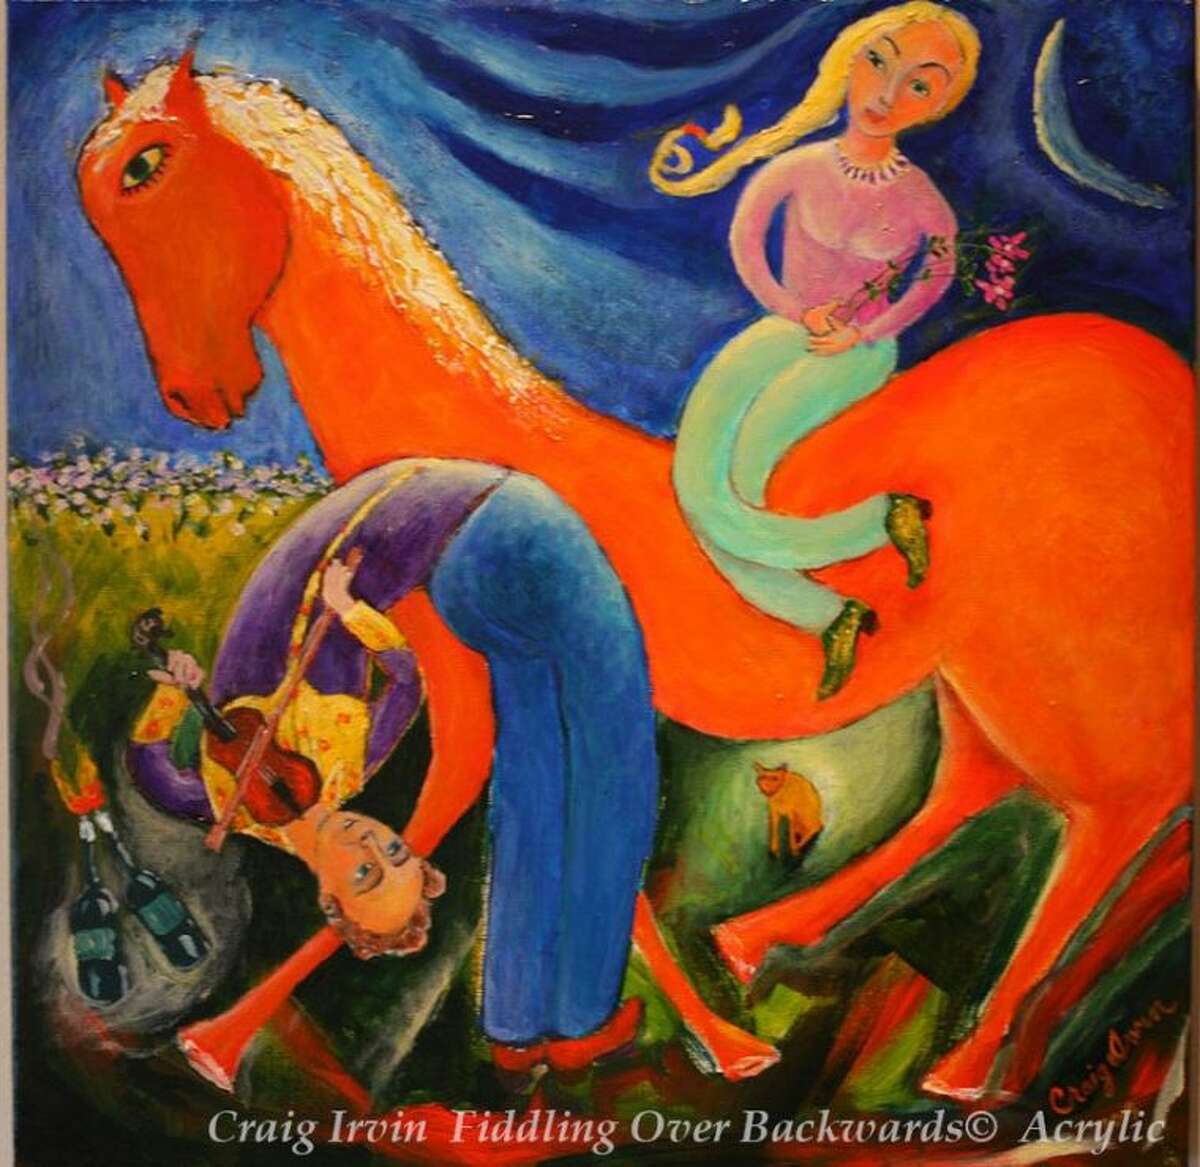 A painting by Craig Irvin titled "Fiddling Over Backwards," which is currently on display at the Gallery at the Madeley Building.